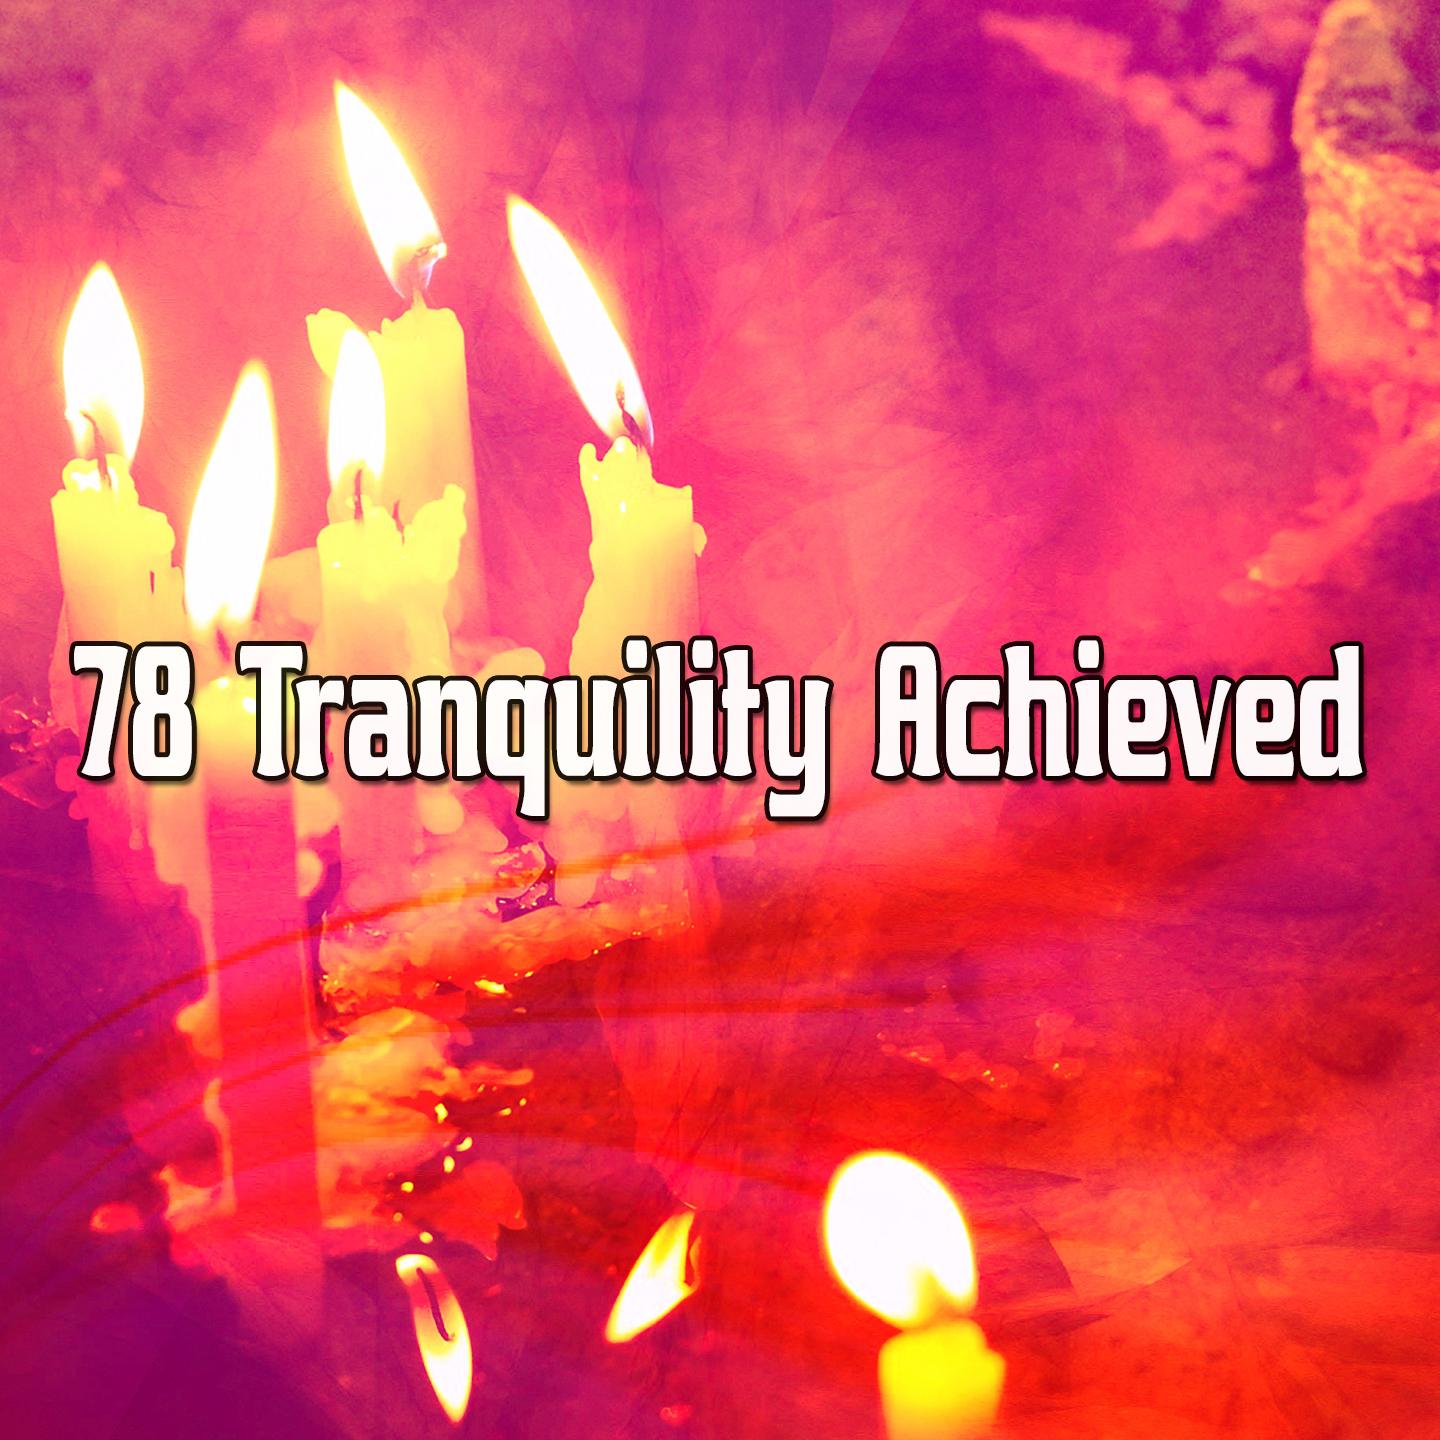 78 Tranquility Achieved